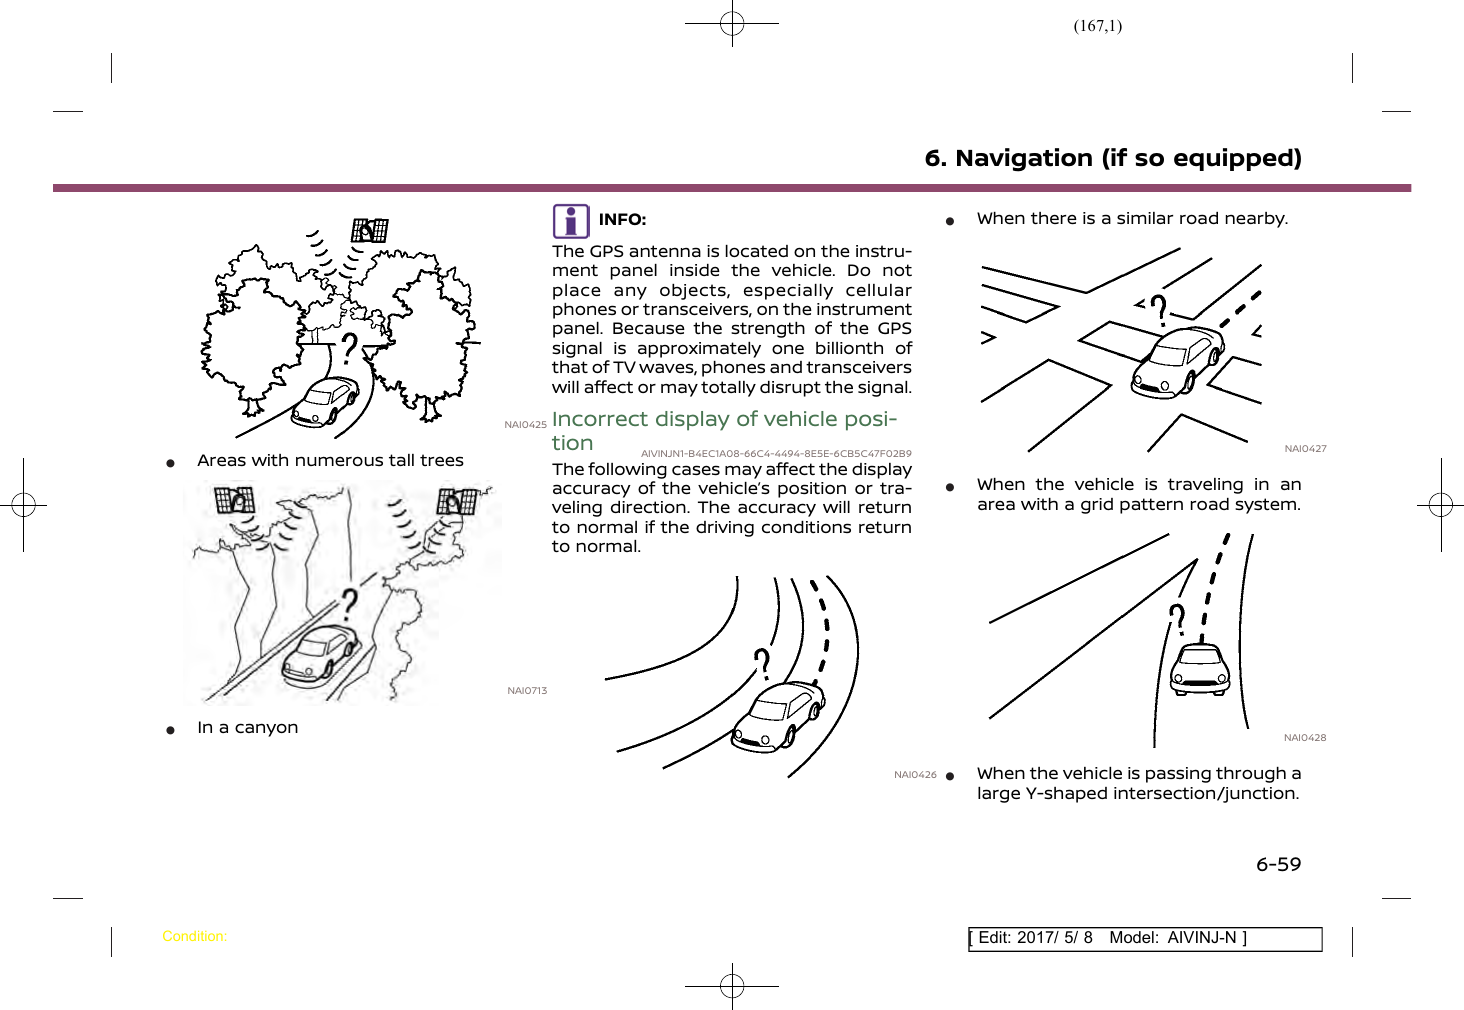 Page 167 of Robert Bosch Car Multimedia AIVICMFB0 Navigation System with Bluetooth and WLAN User Manual